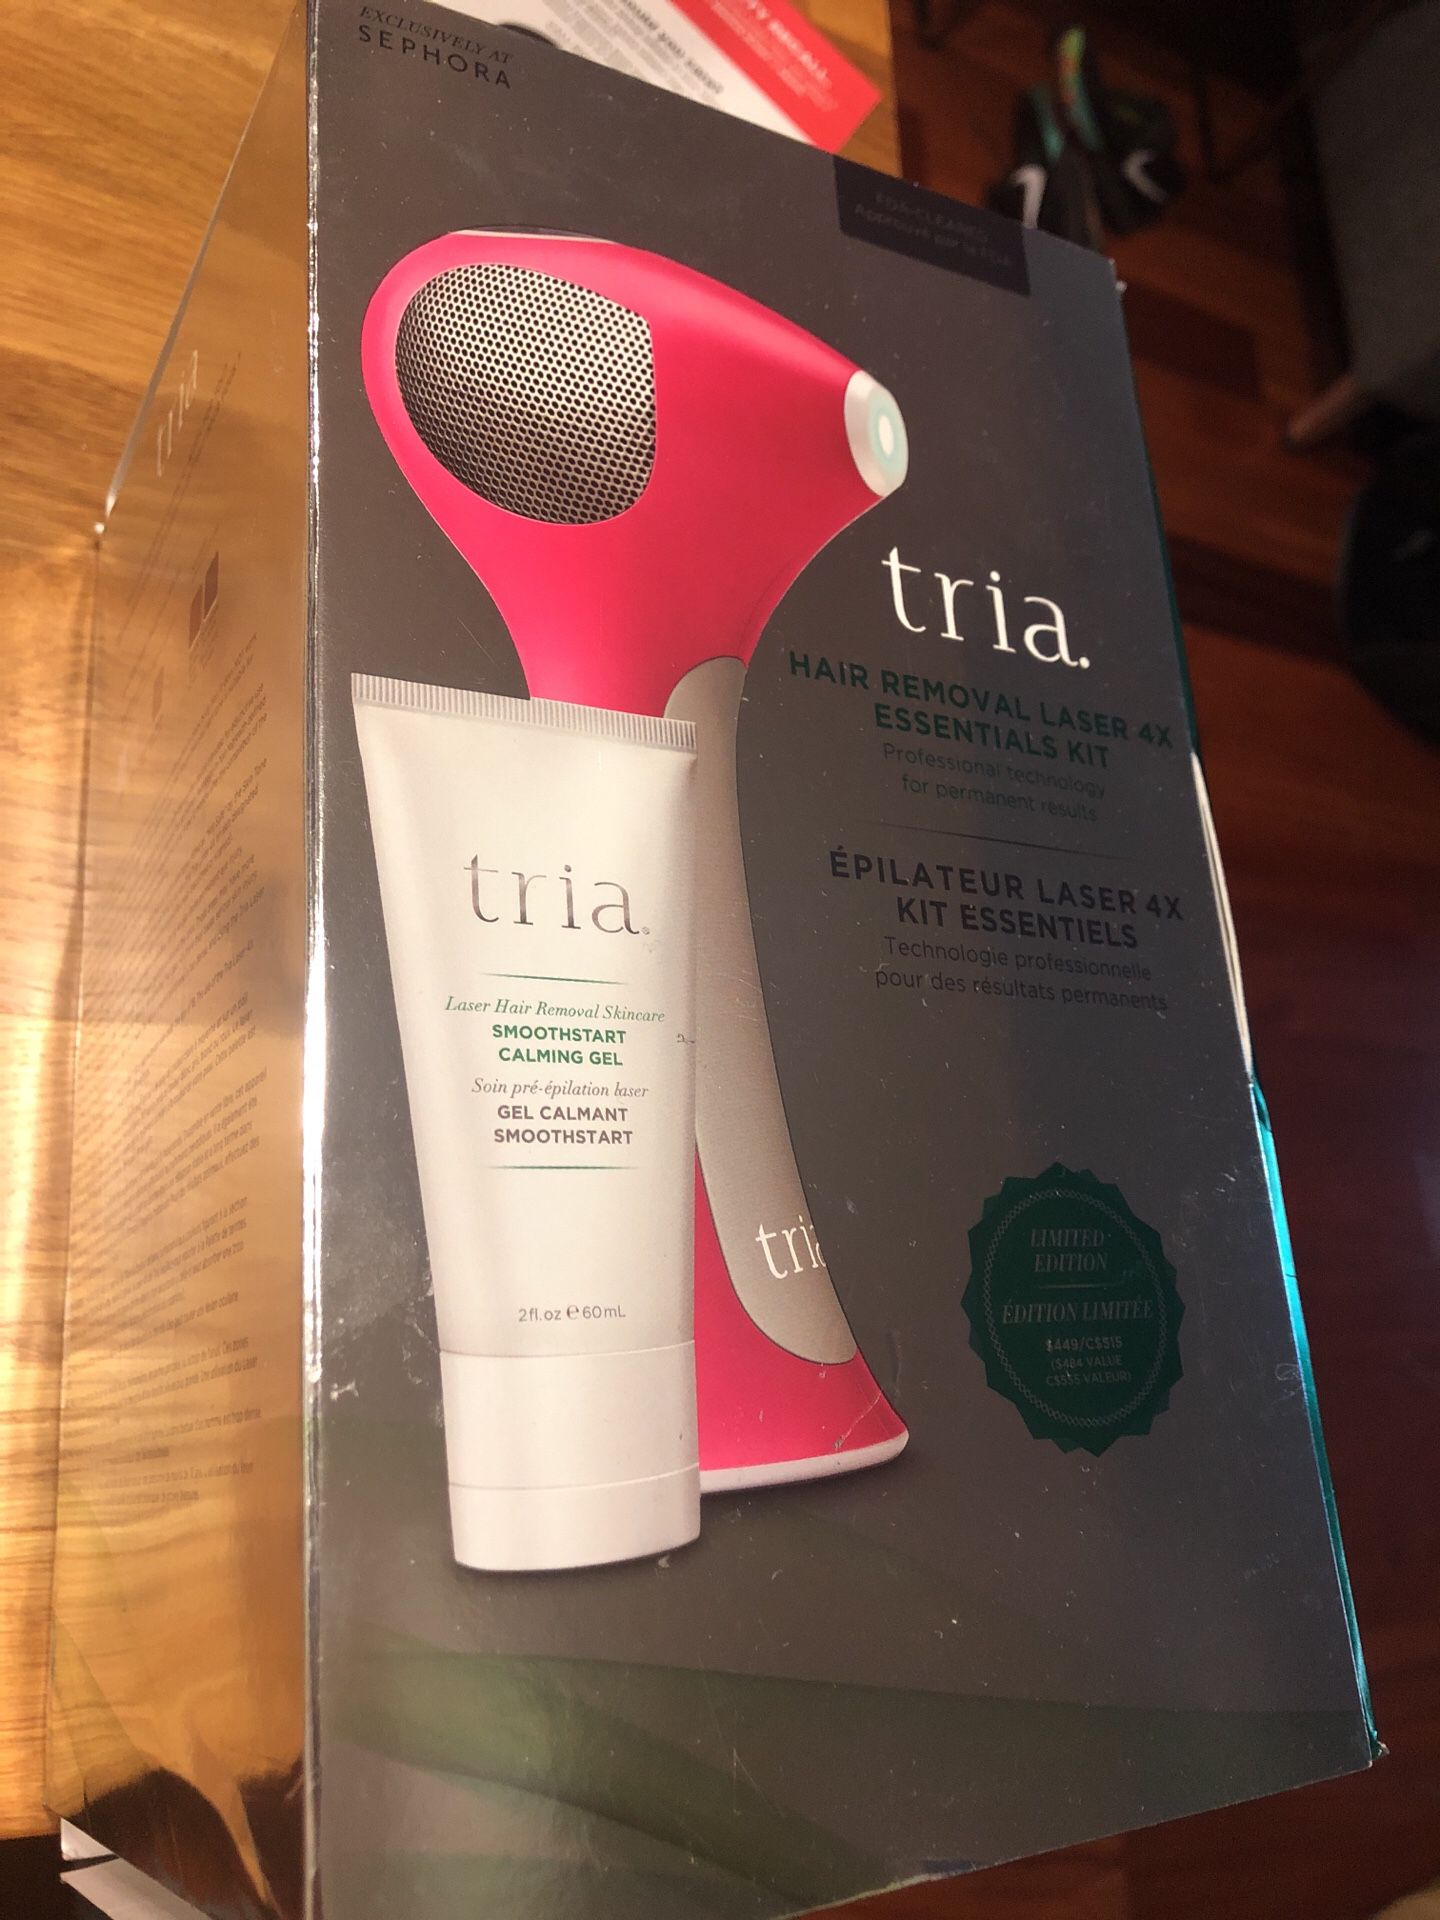 Tria - safe hair removal at home - never used